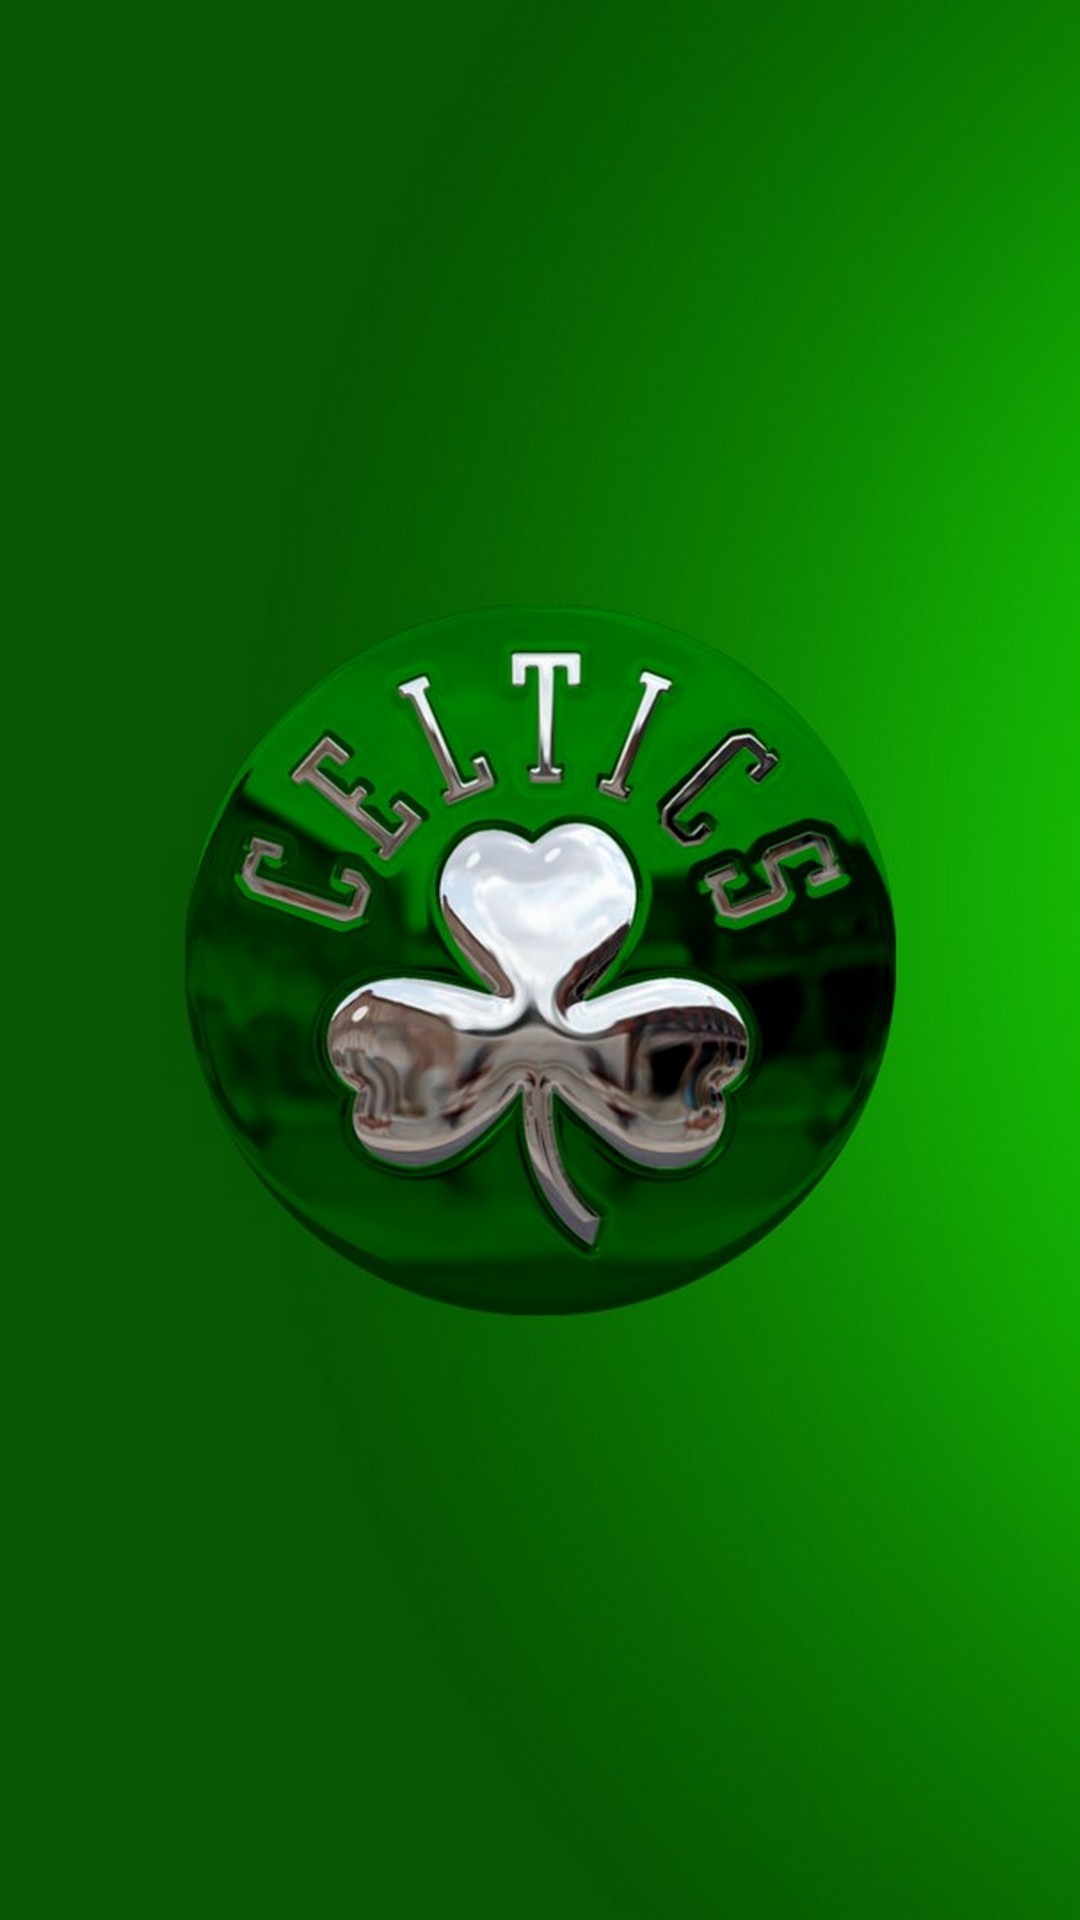 Boston Celtics Wallpaper For Android with image resolution 1080x1920 pixel. You can make this wallpaper for your Android backgrounds, Tablet, Smartphones Screensavers and Mobile Phone Lock Screen